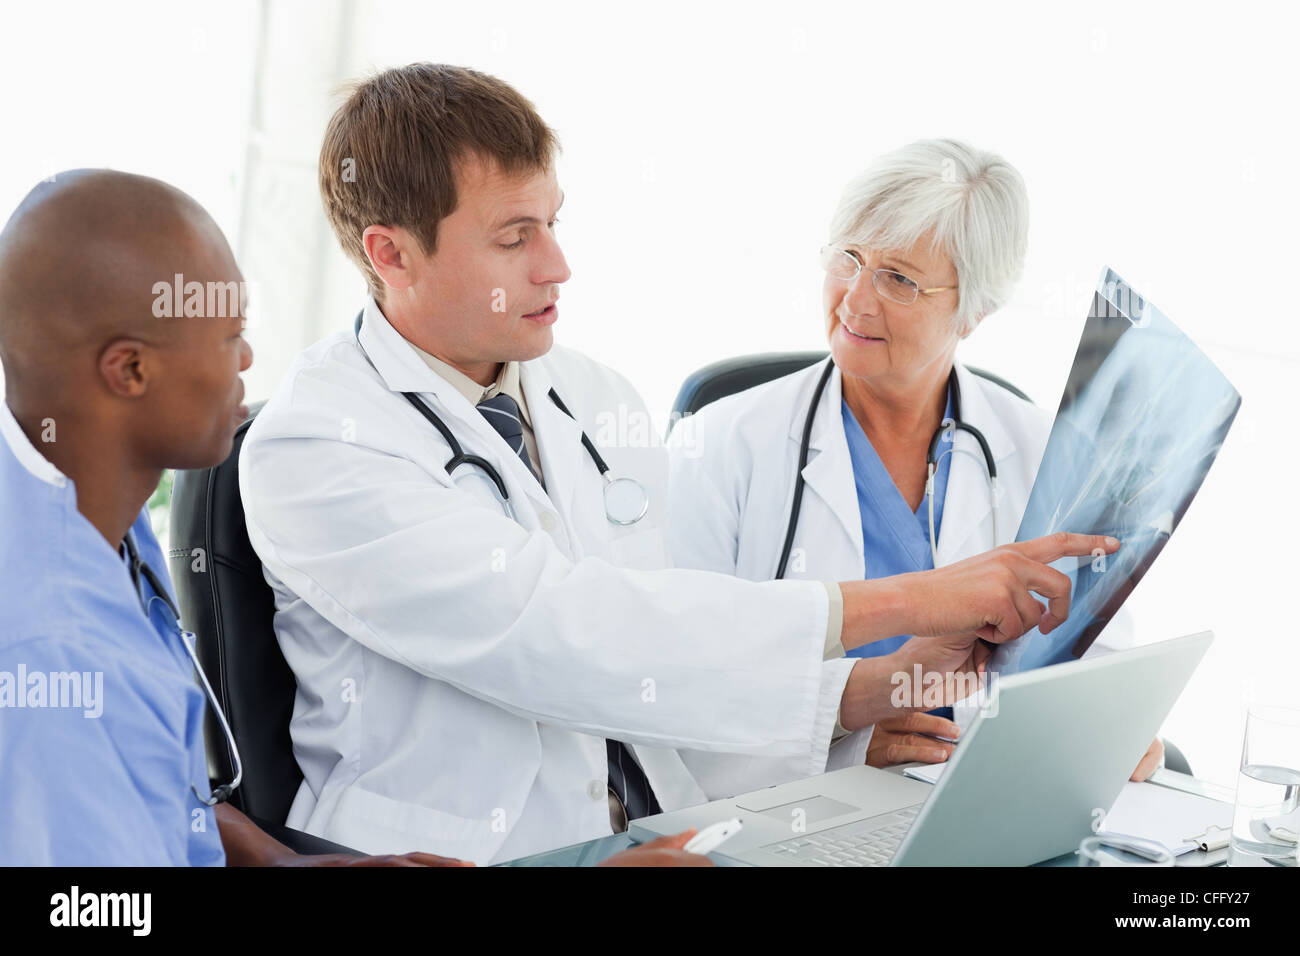 Medical team looking at an x-ray Stock Photo